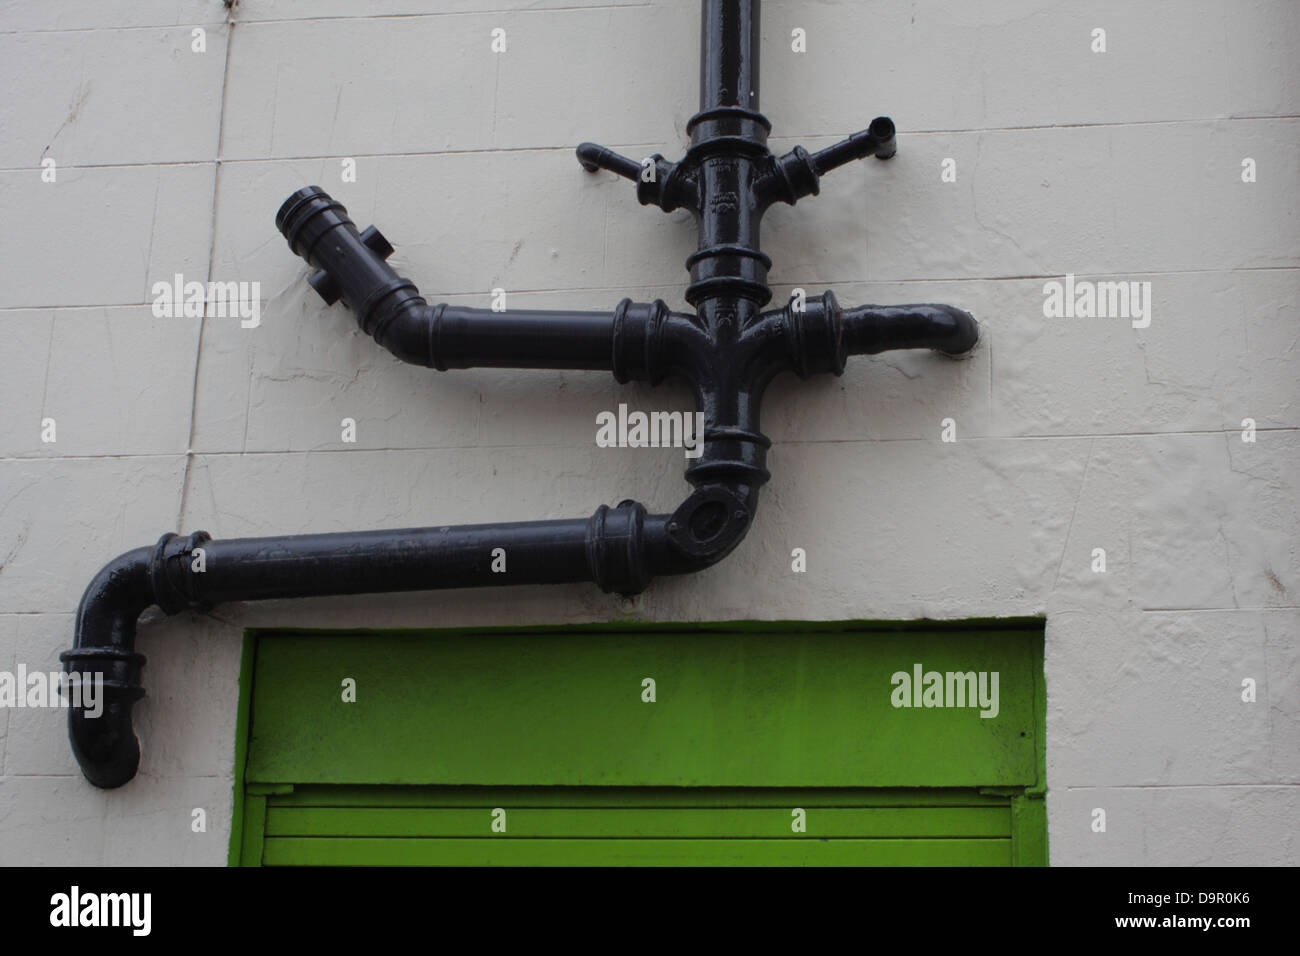 Drainpipes. multiple drainpipes on the outside of a building. Stock Photo